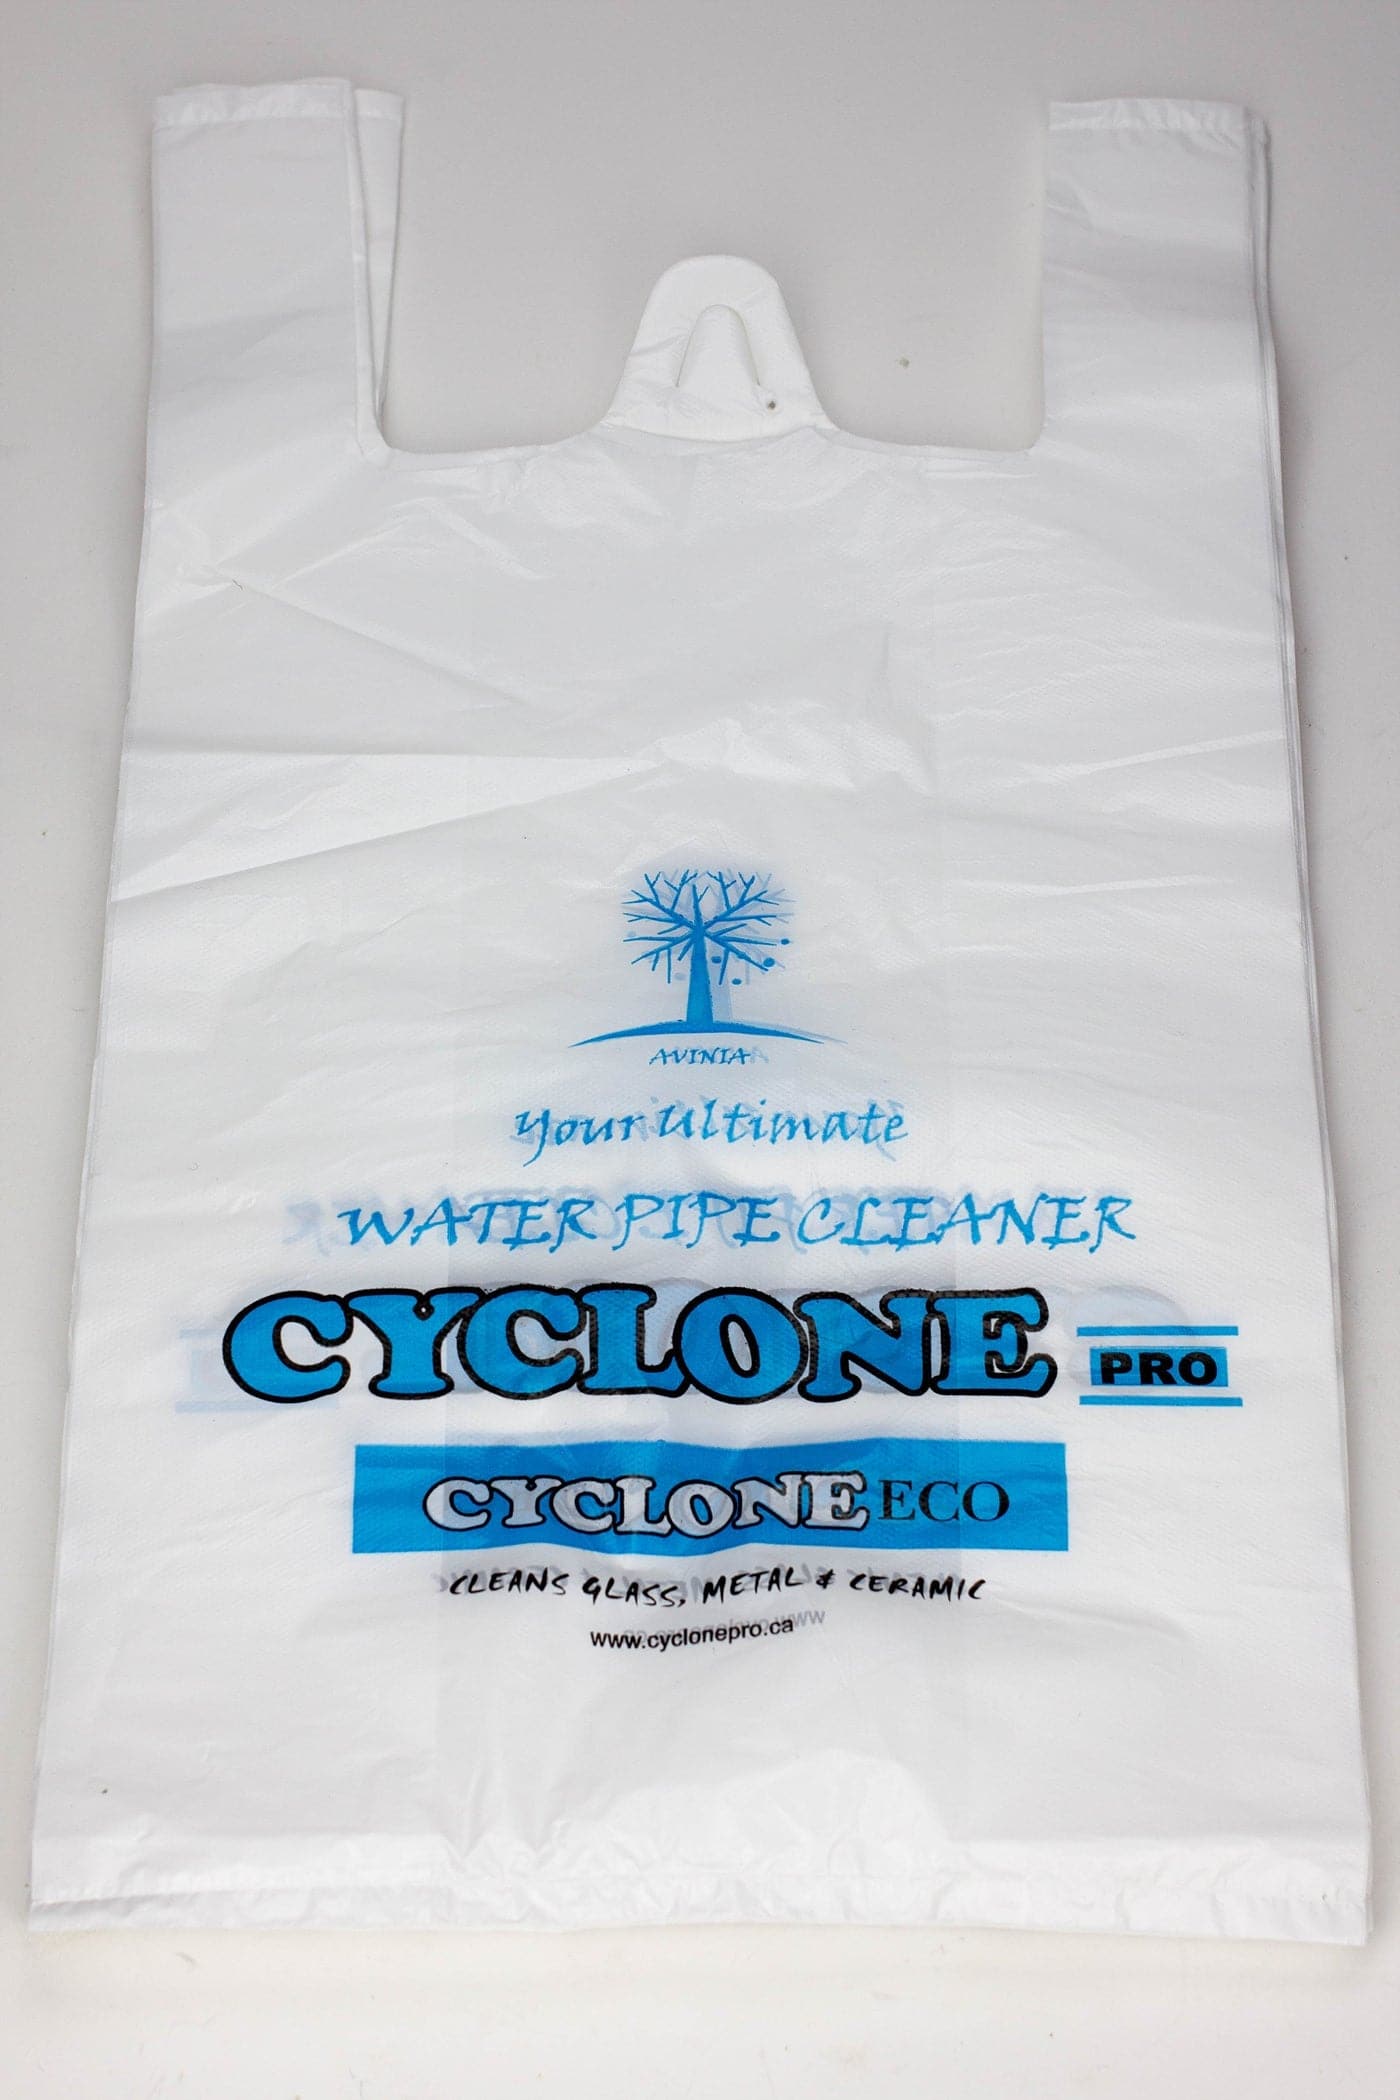 Cyclone pro water pipe cleaner_2